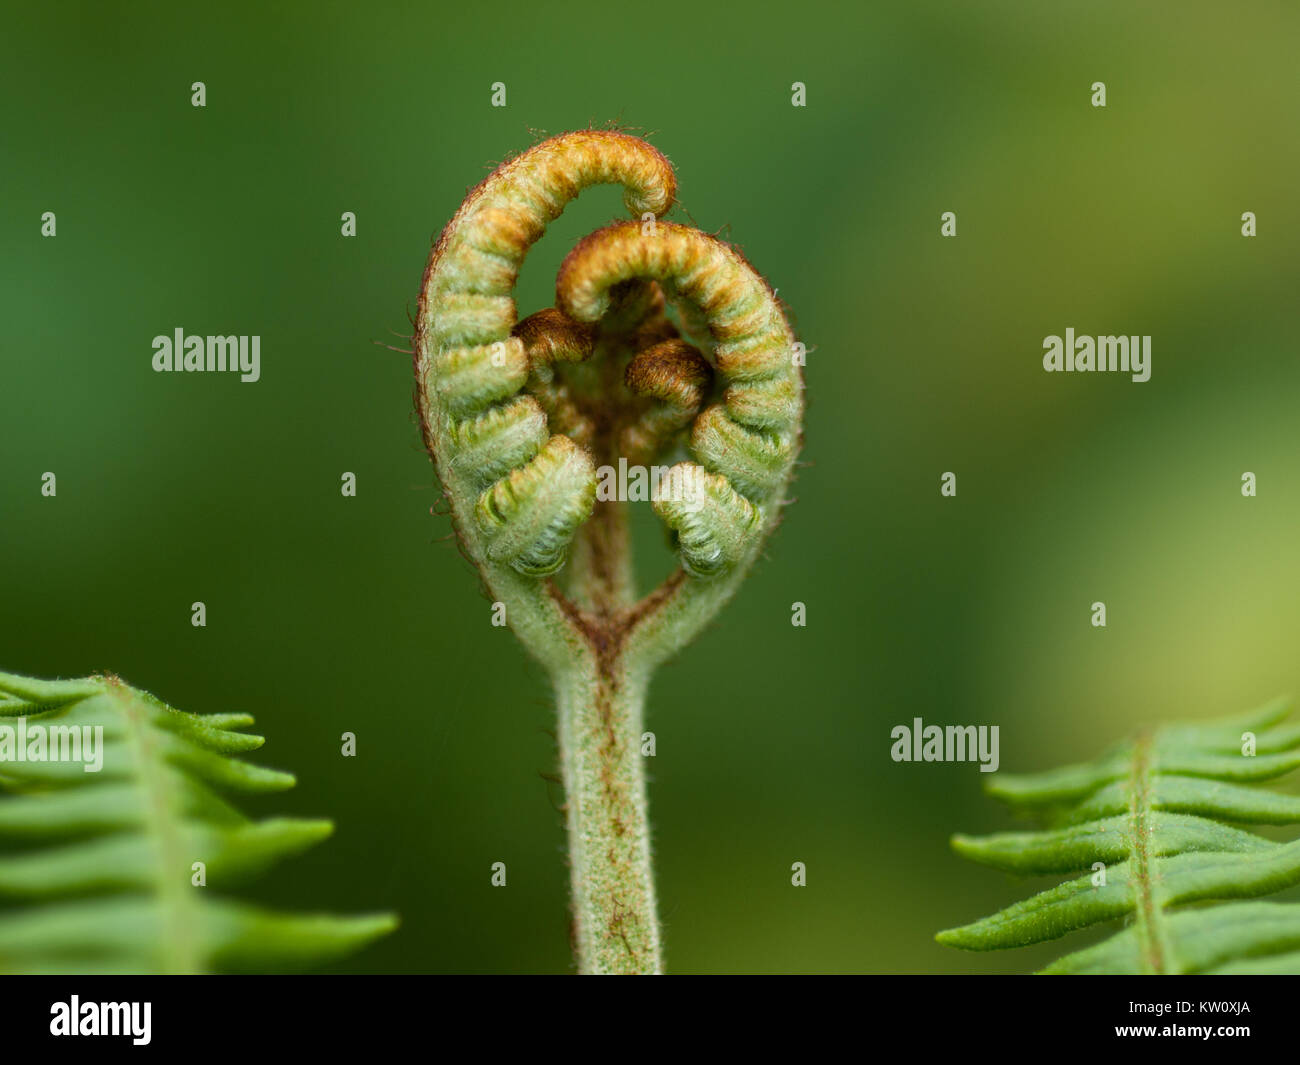 New upright growth of common bracken bud unfolding in spring Stock Photo